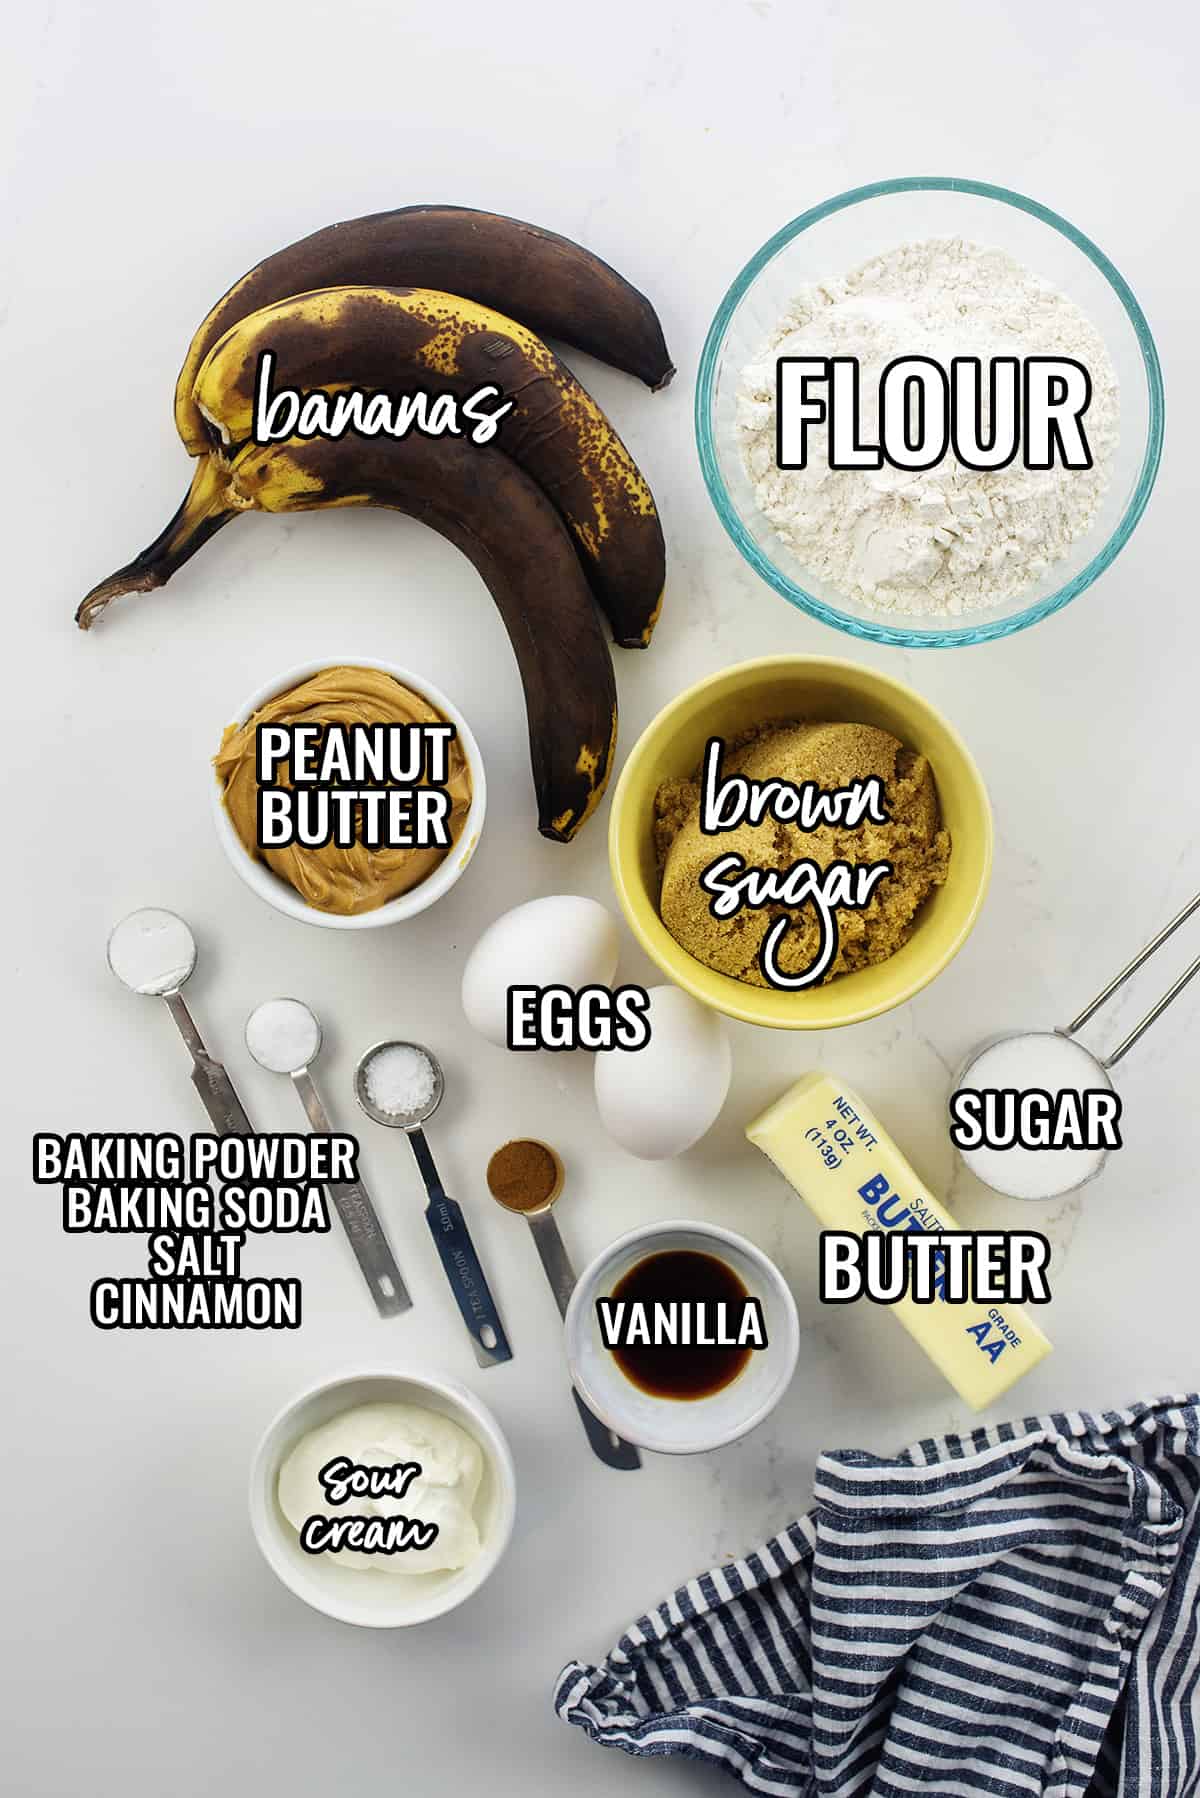 Ingredients for peanut butter banana bread recipe.